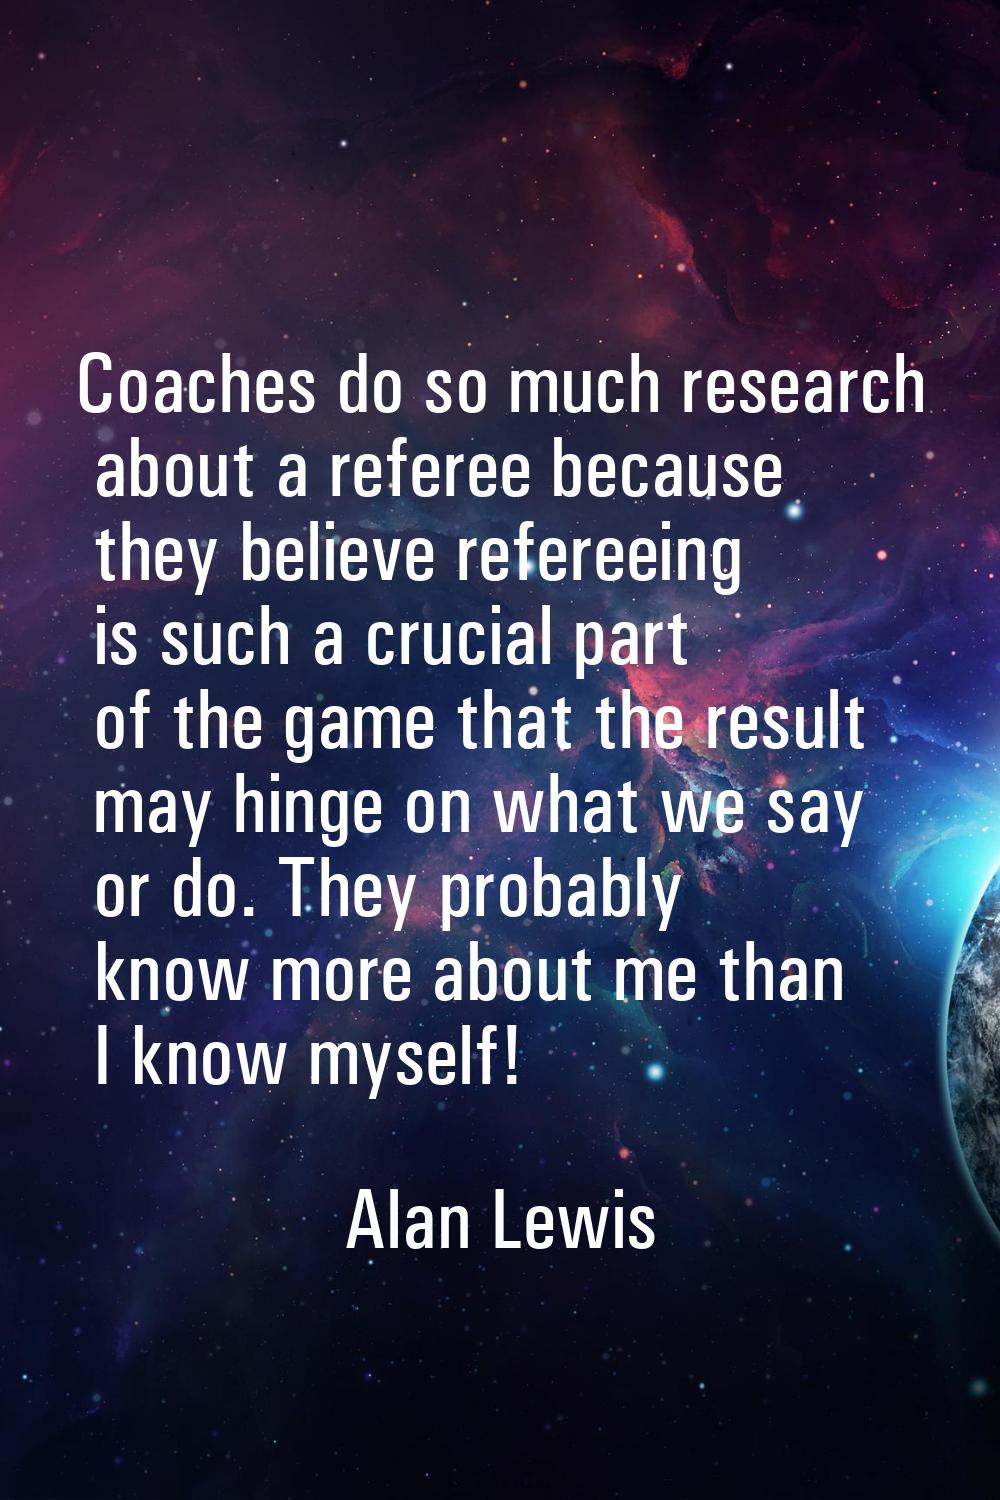 Coaches do so much research about a referee because they believe refereeing is such a crucial part 